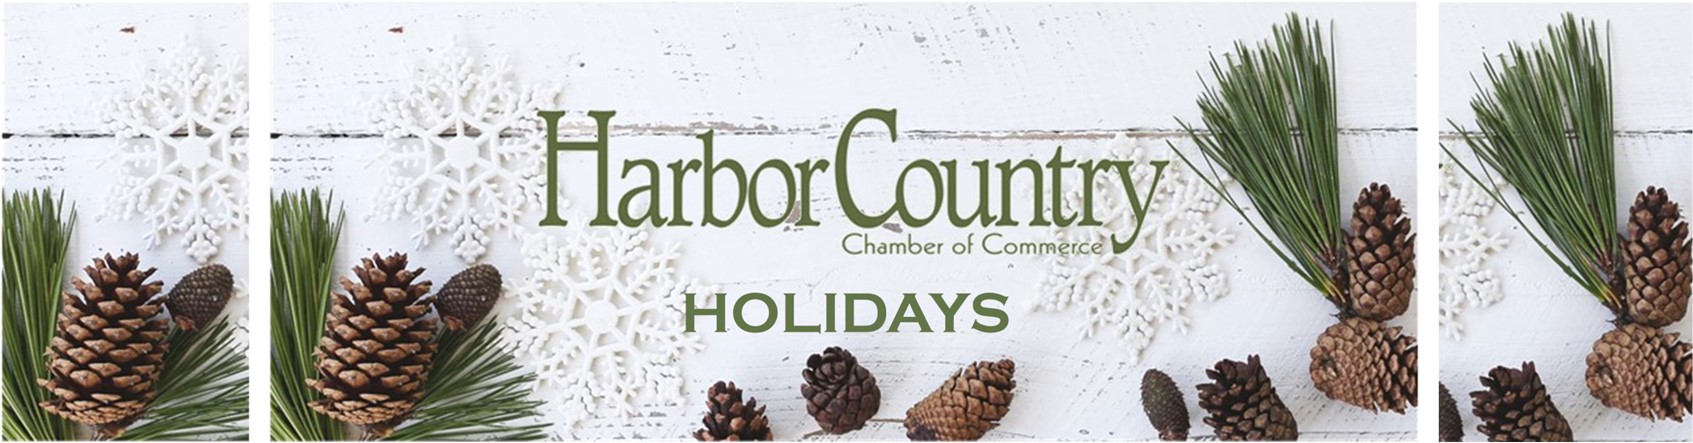 Holidays In Harbor Country 2